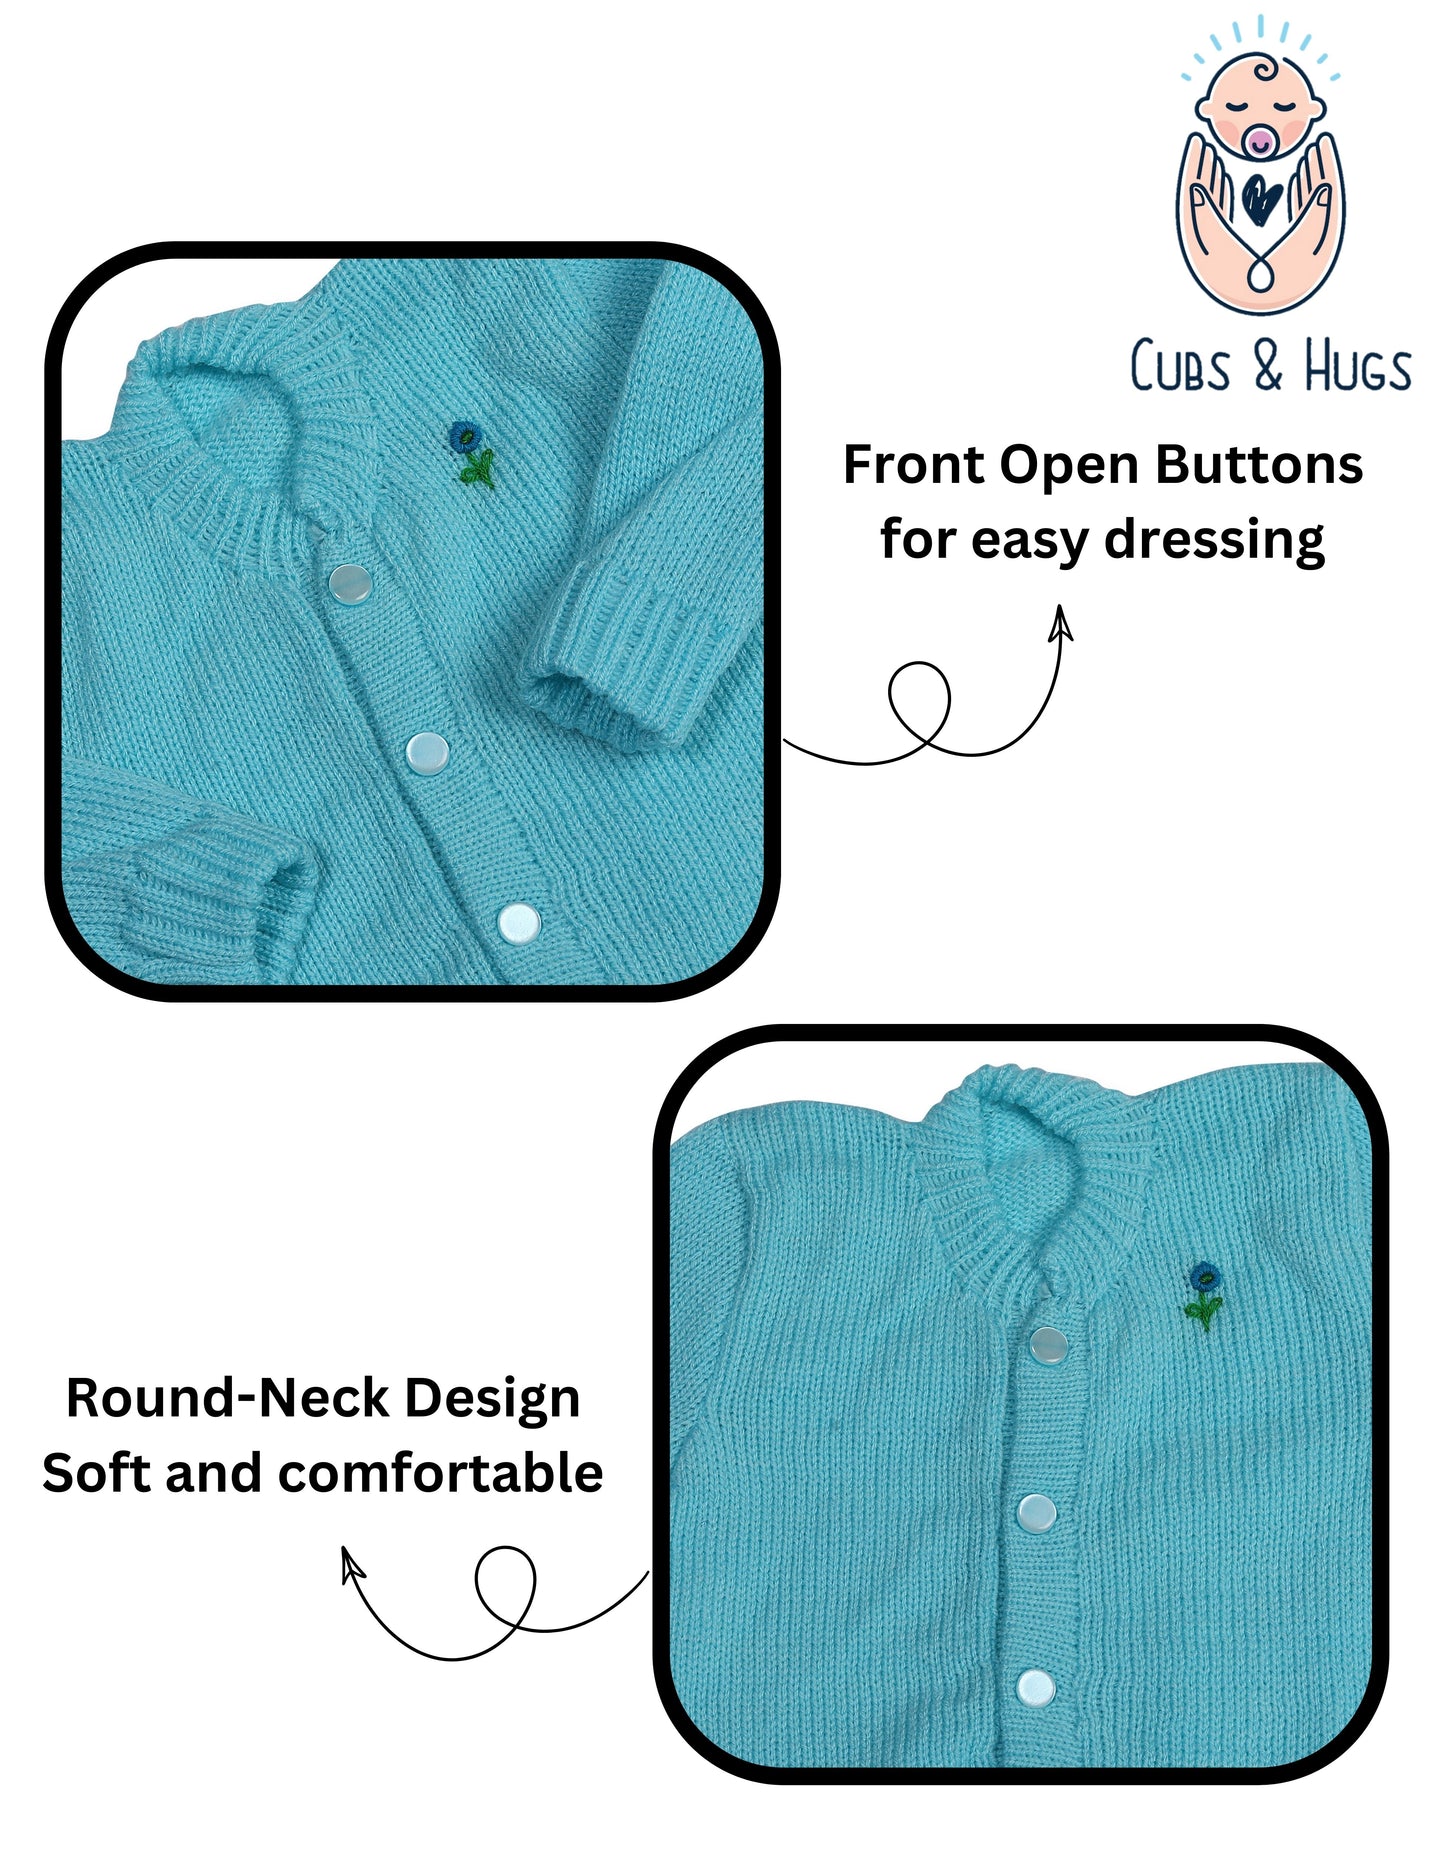 CUBS & HUGS Baby Sweater Front Open Round Neck Cardigan- Turquoise